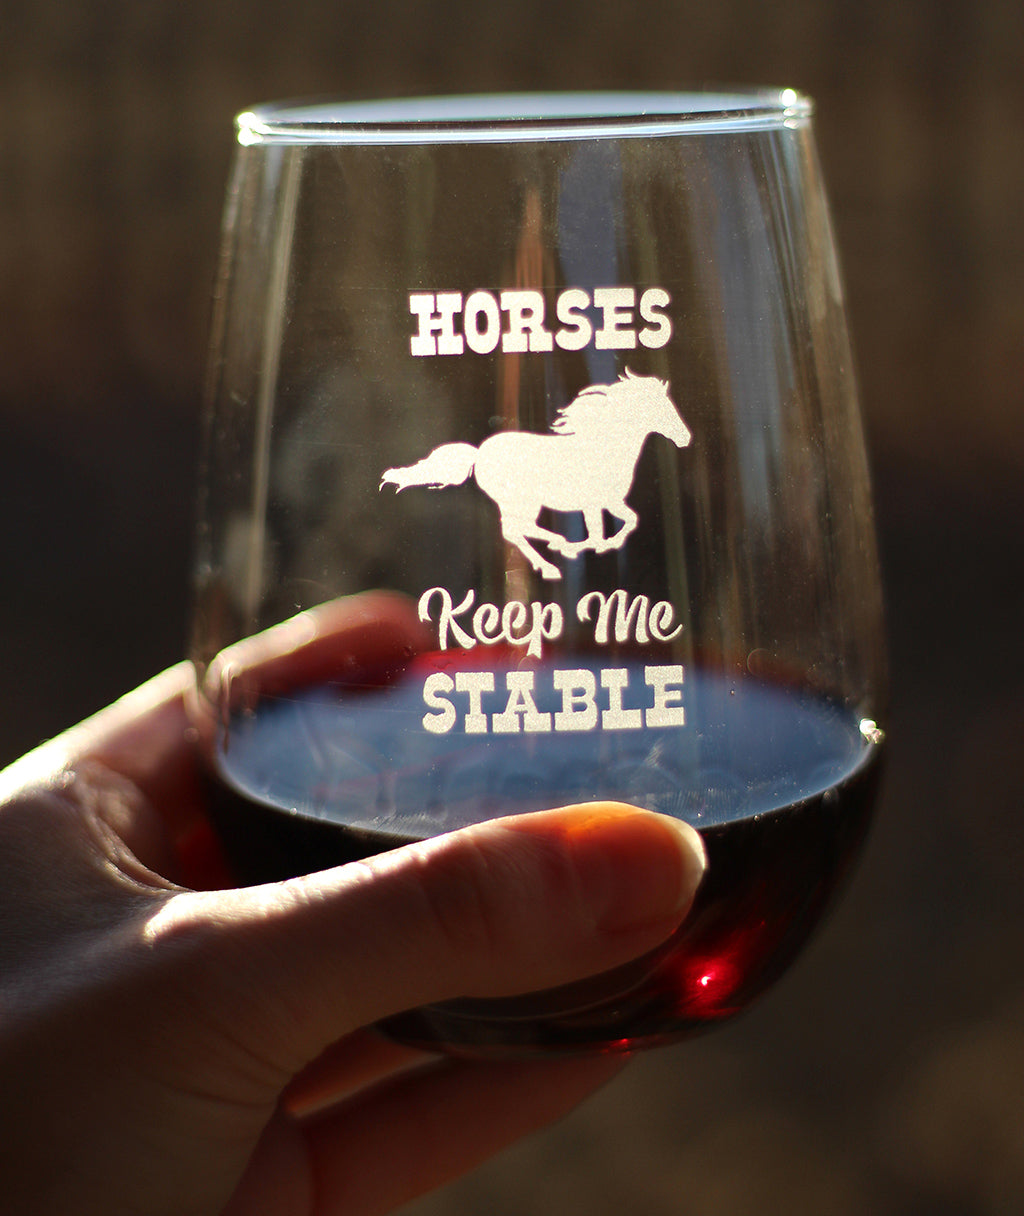 Horses Keep Me Stable – Cute Funny Stemless Wine Glass, Large 17 Ounces, Etched Sayings, Gift Box